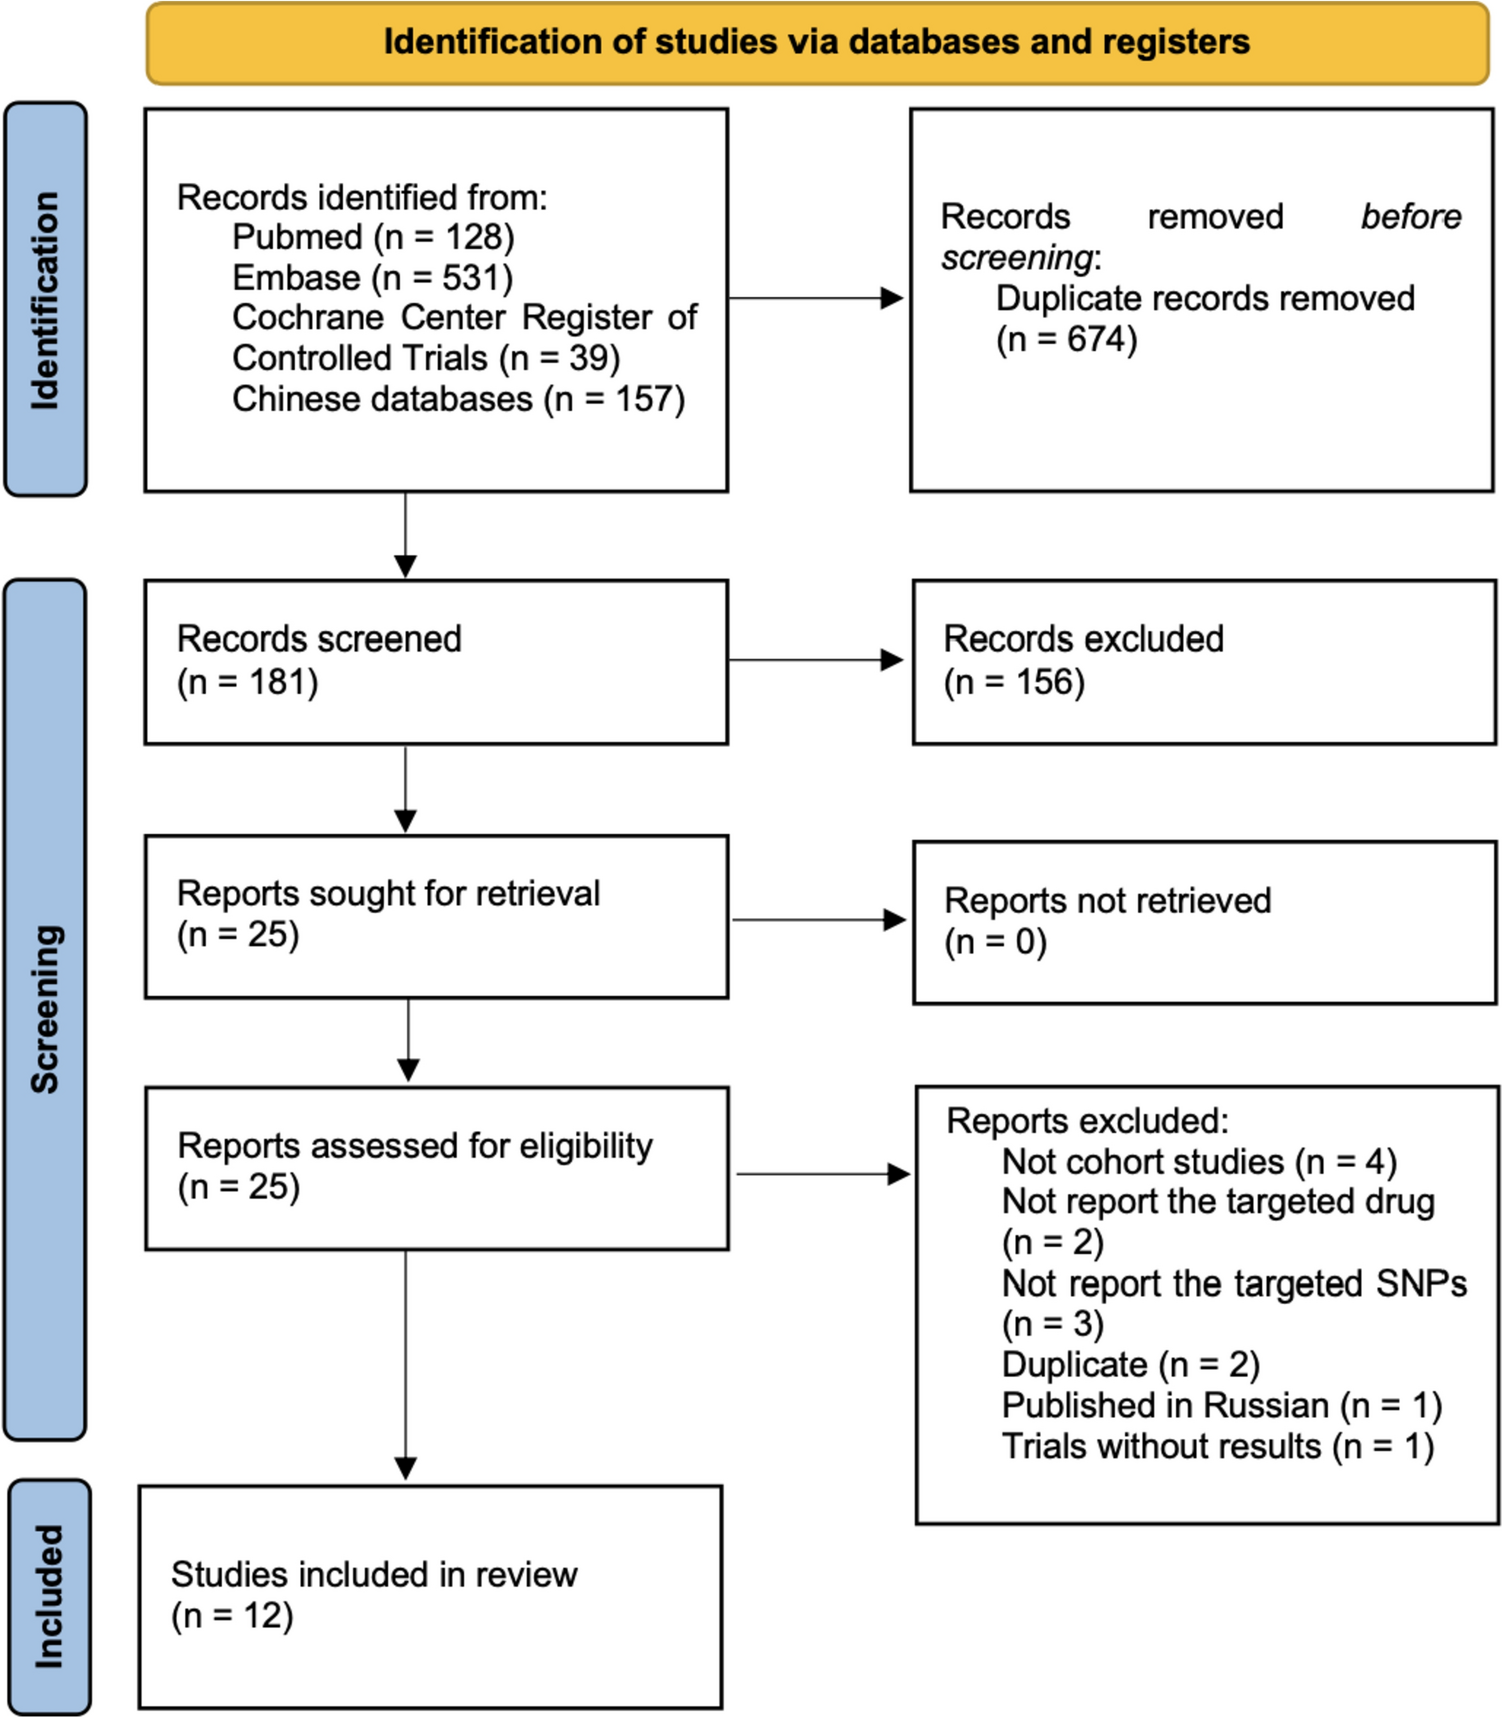 Toward Genetic Testing of Rivaroxaban? Insights from a Systematic Review on the Role of Genetic Polymorphism in Rivaroxaban Therapy